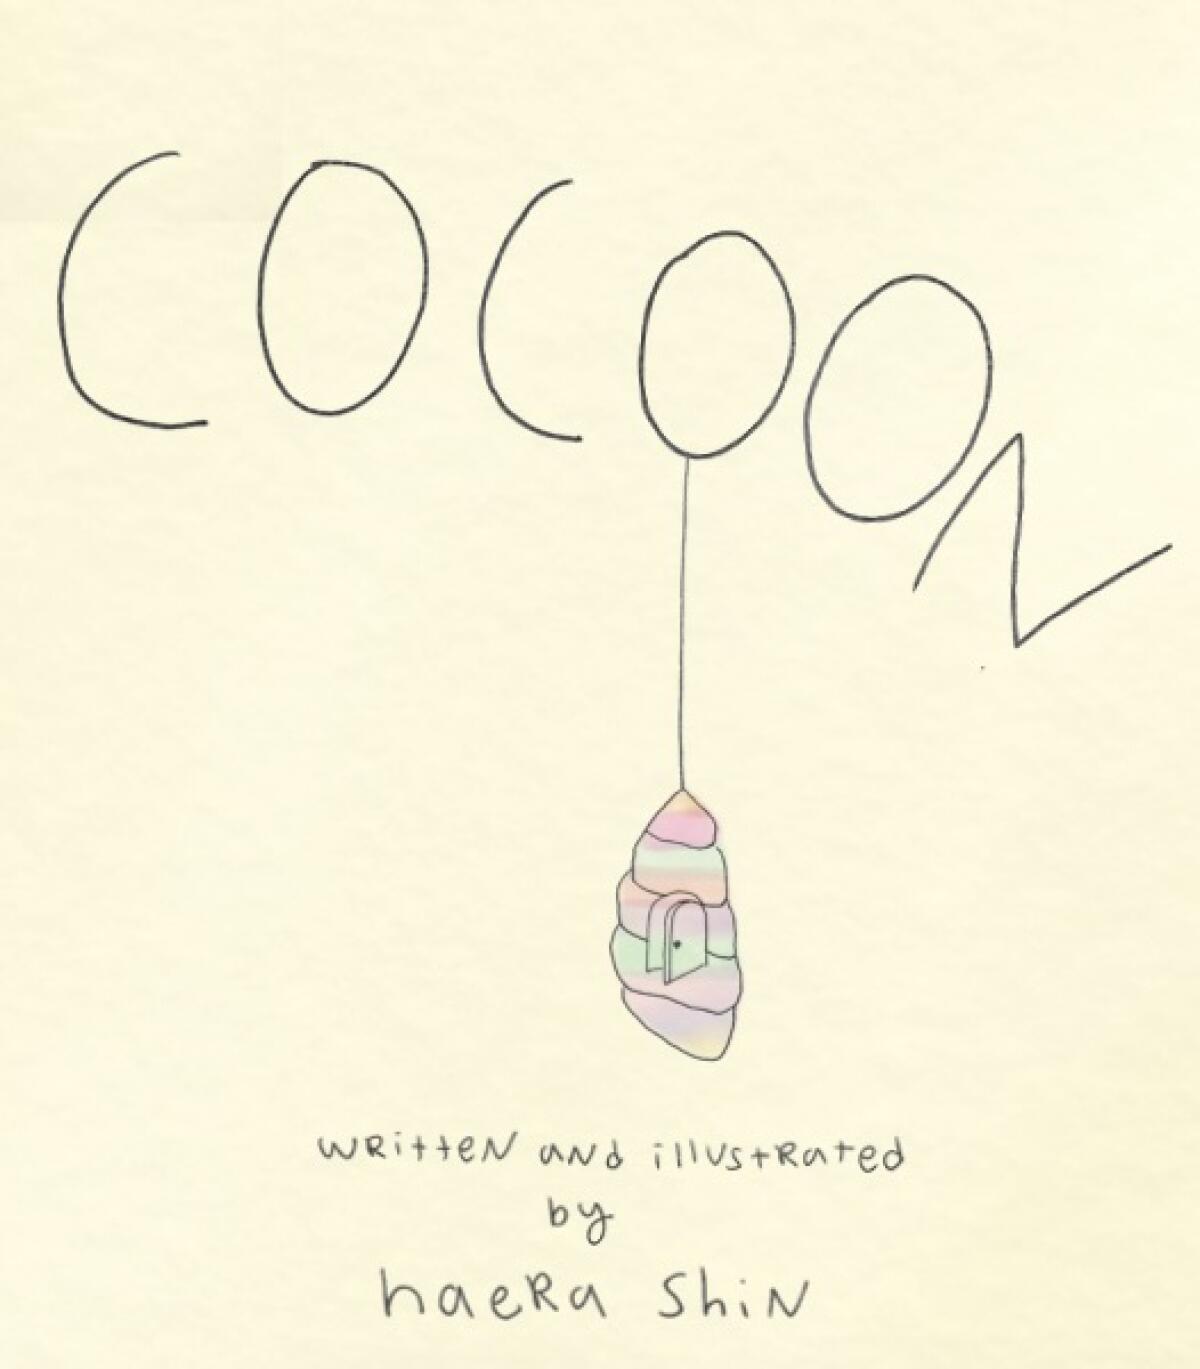 CCA junior Haera Shin published a book called "Cocoon".